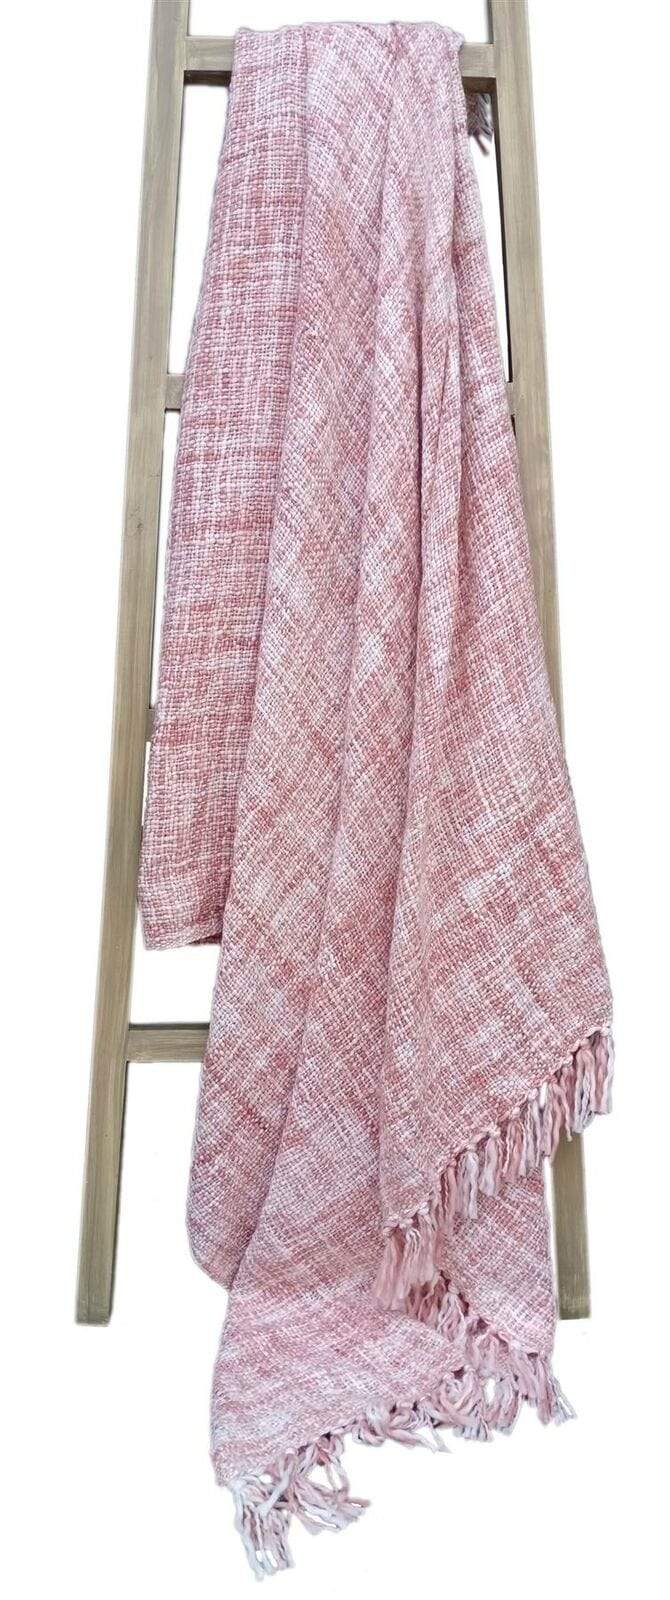 French Tonal Chenille Throw PINK OLIVIA ROCCO Throw